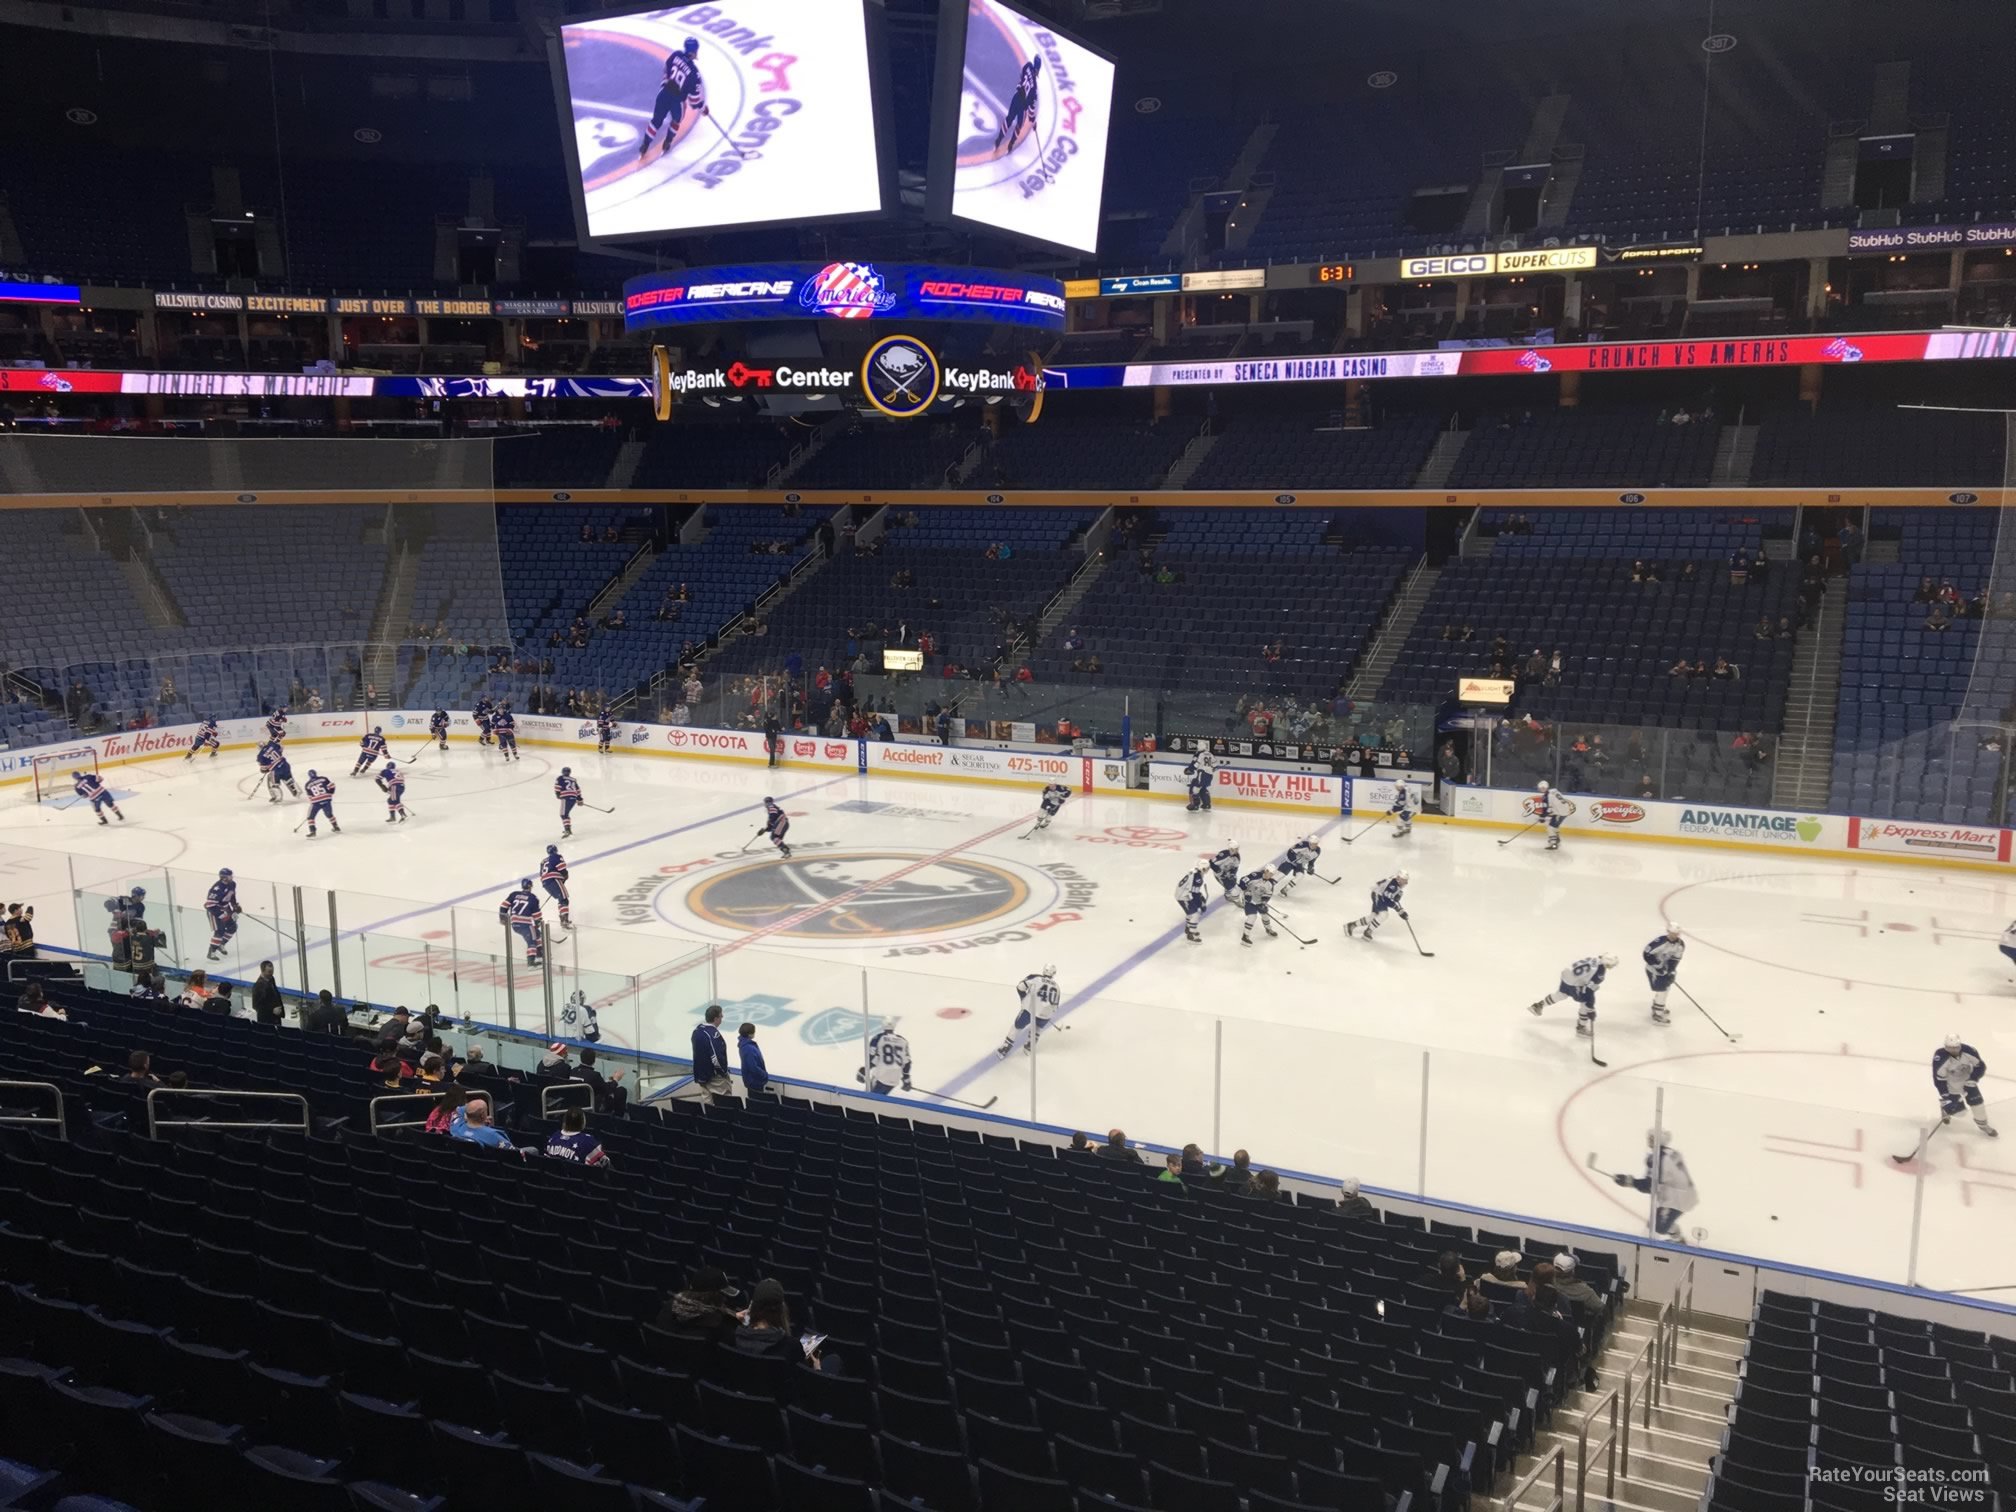 Section 216 at KeyBank Center - RateYourSeats.com